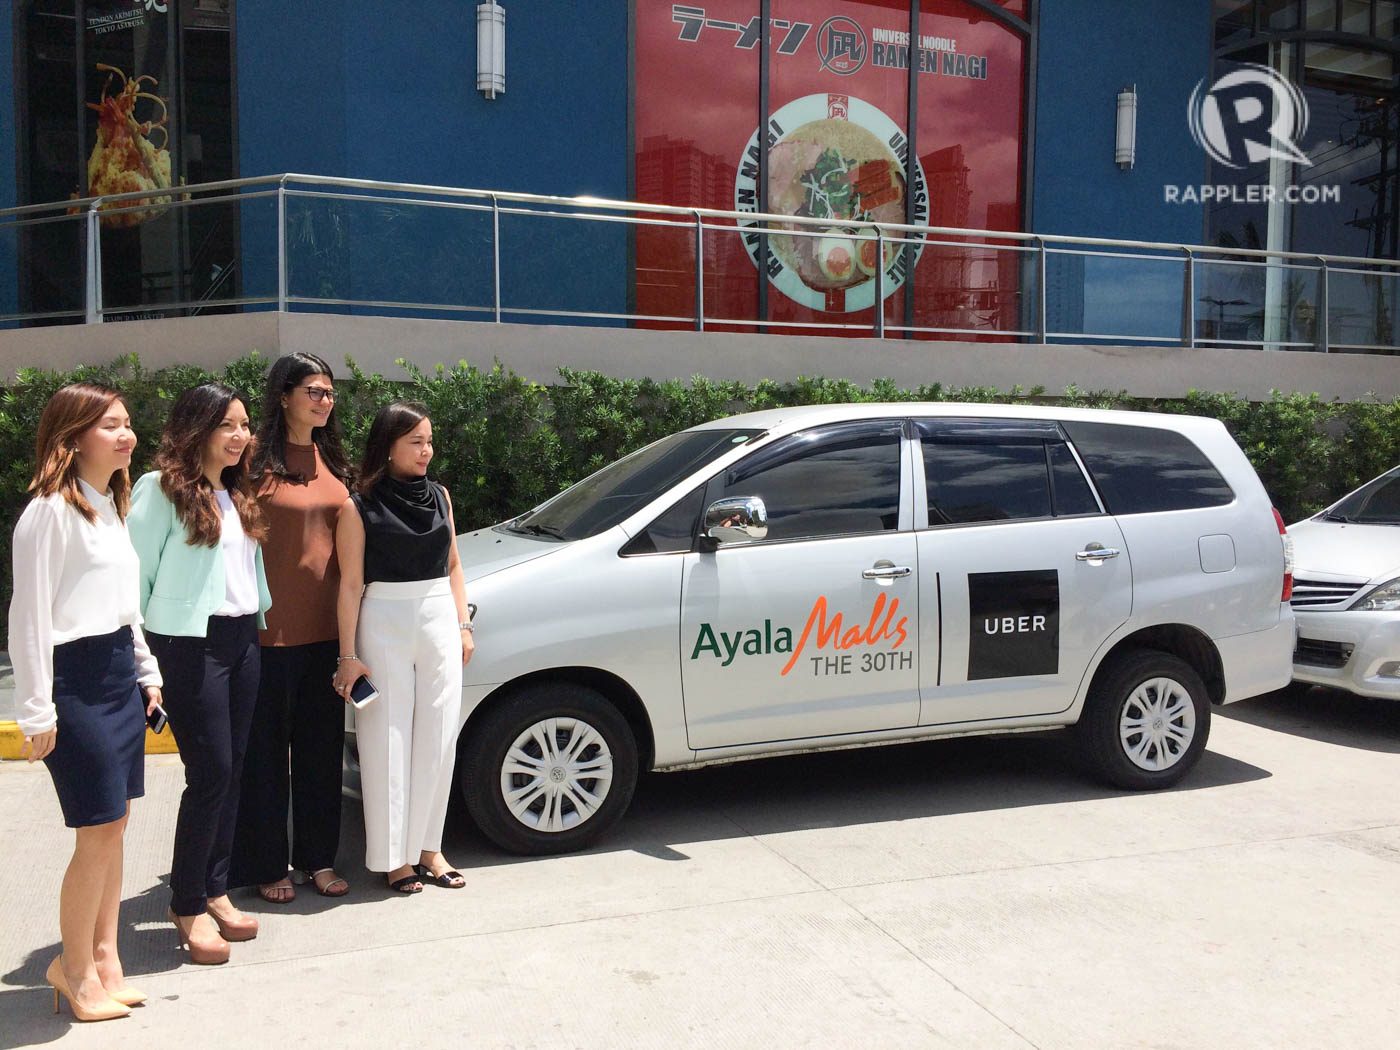 Ayala Malls, Uber team up for carpool routes to and from The 30th